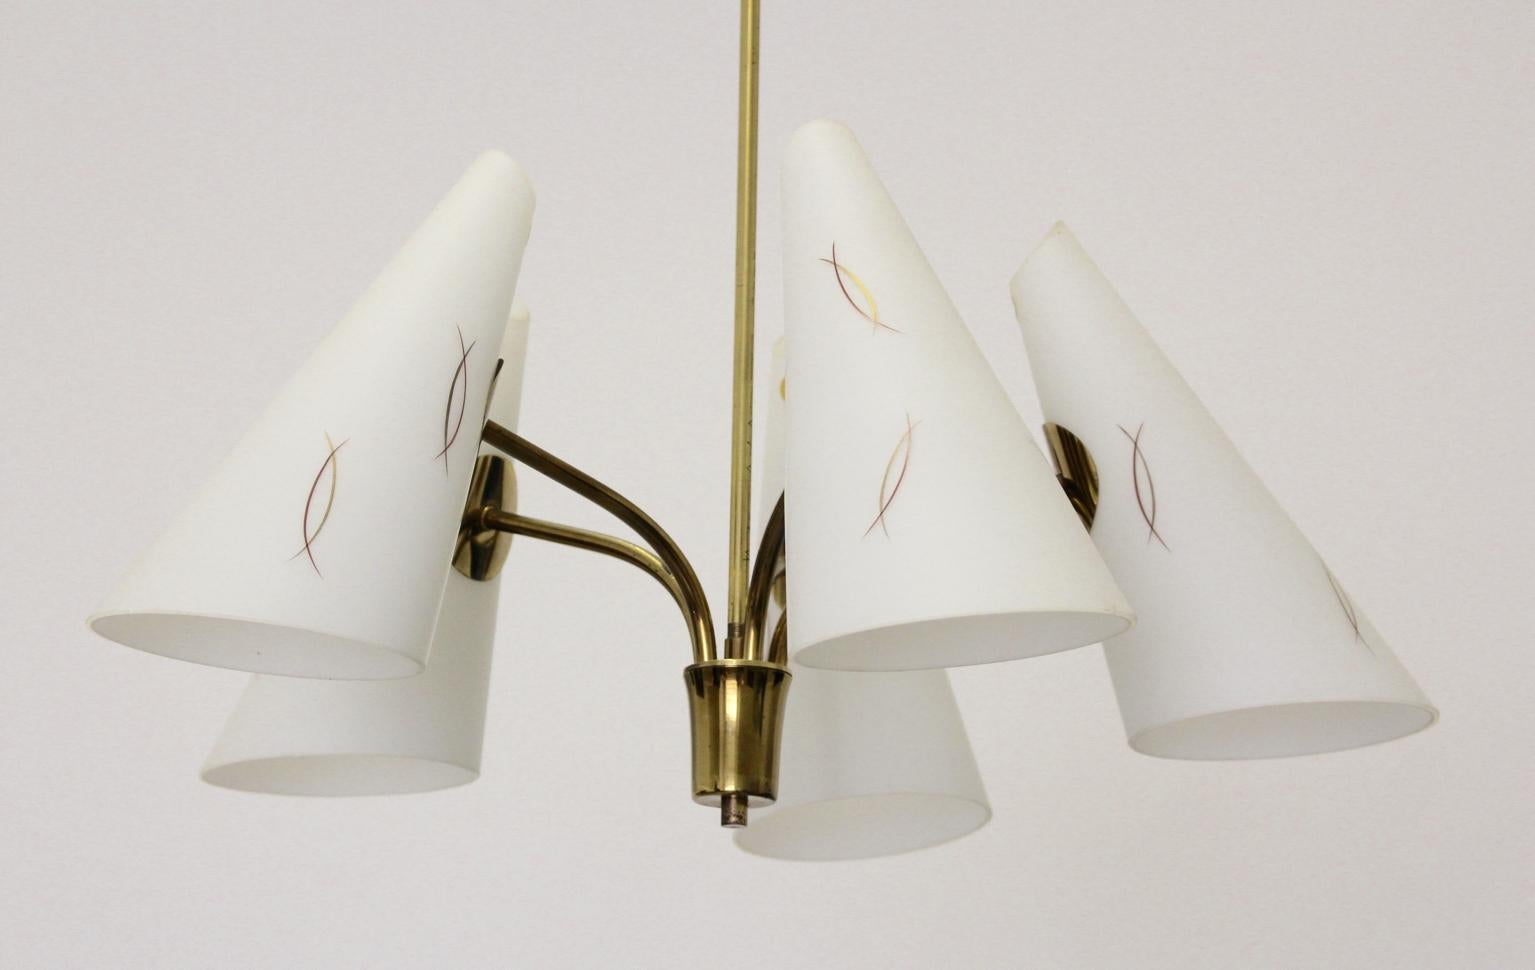 This Mid-Century Modern vintage brass chandelier with 5 patterned cone milk glass shades was designed and made by Rupert Nikoll, 1950s Vienna.
The chandelier is labeled.
Also the brass chandelier shows 5 E 27 sockets.
The chandelier is in very